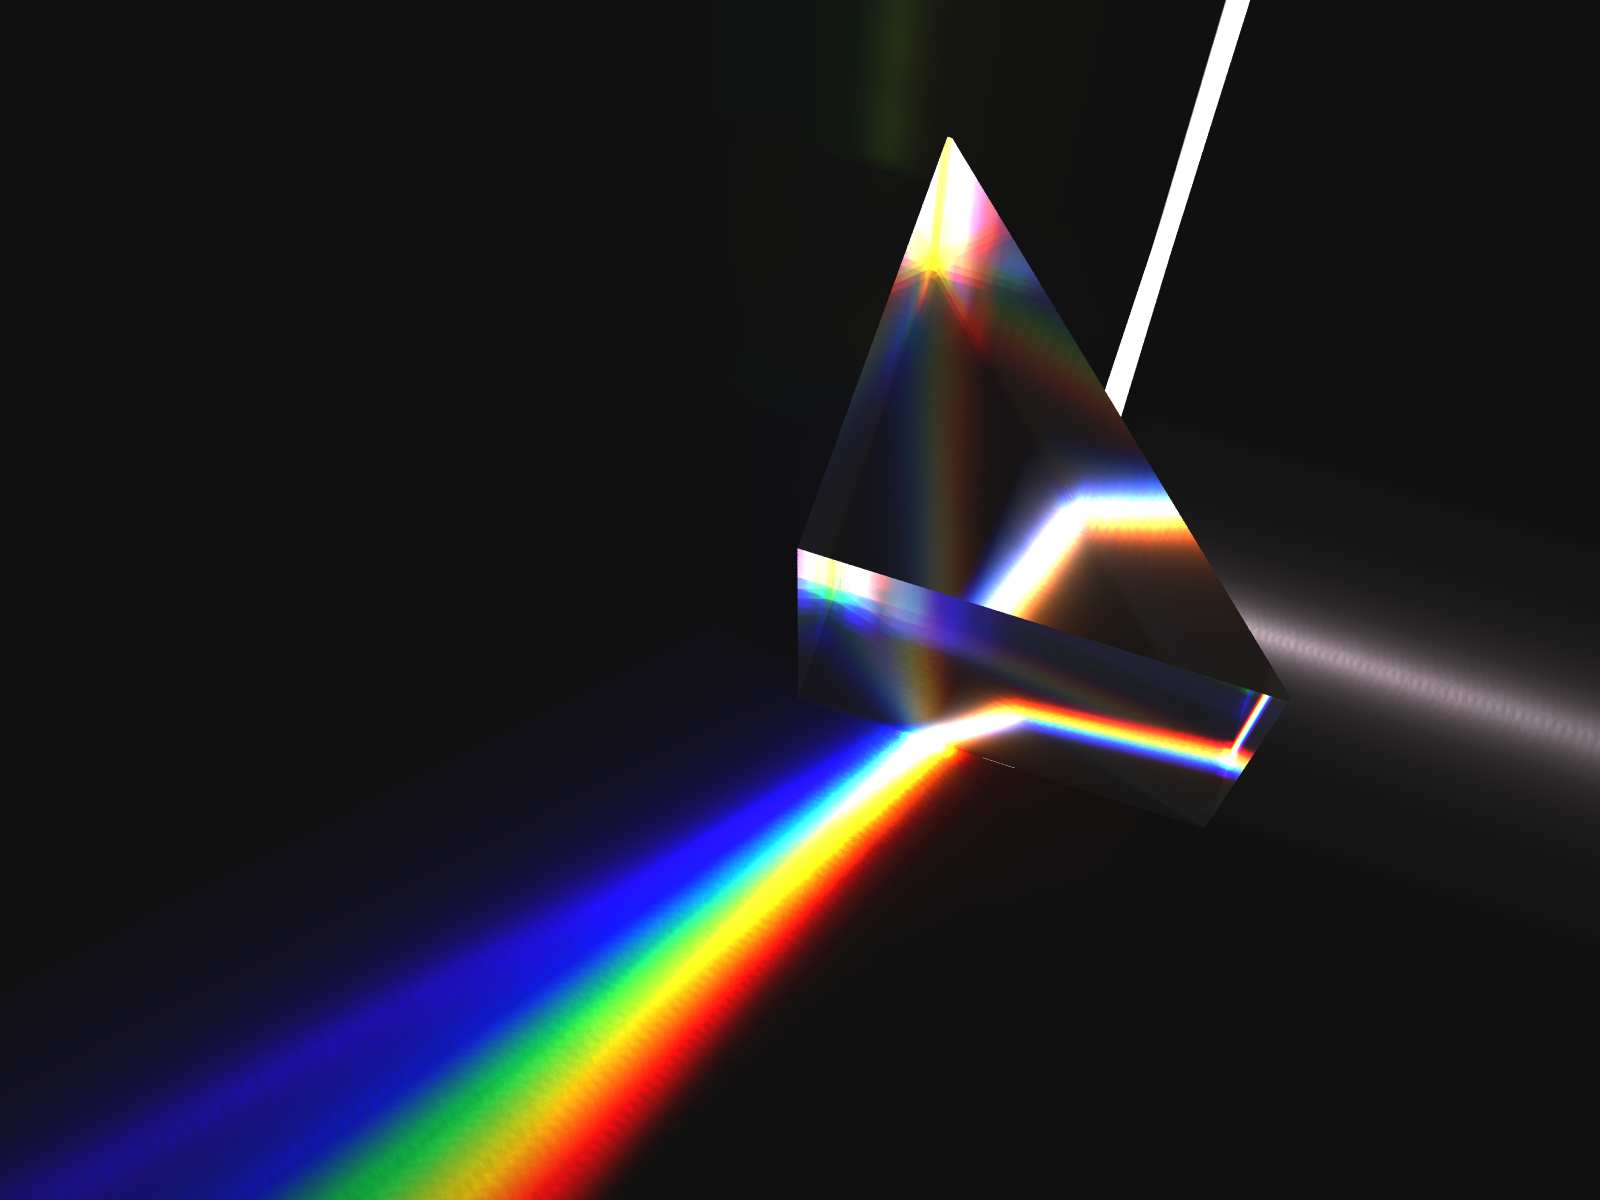 How does a prism work?